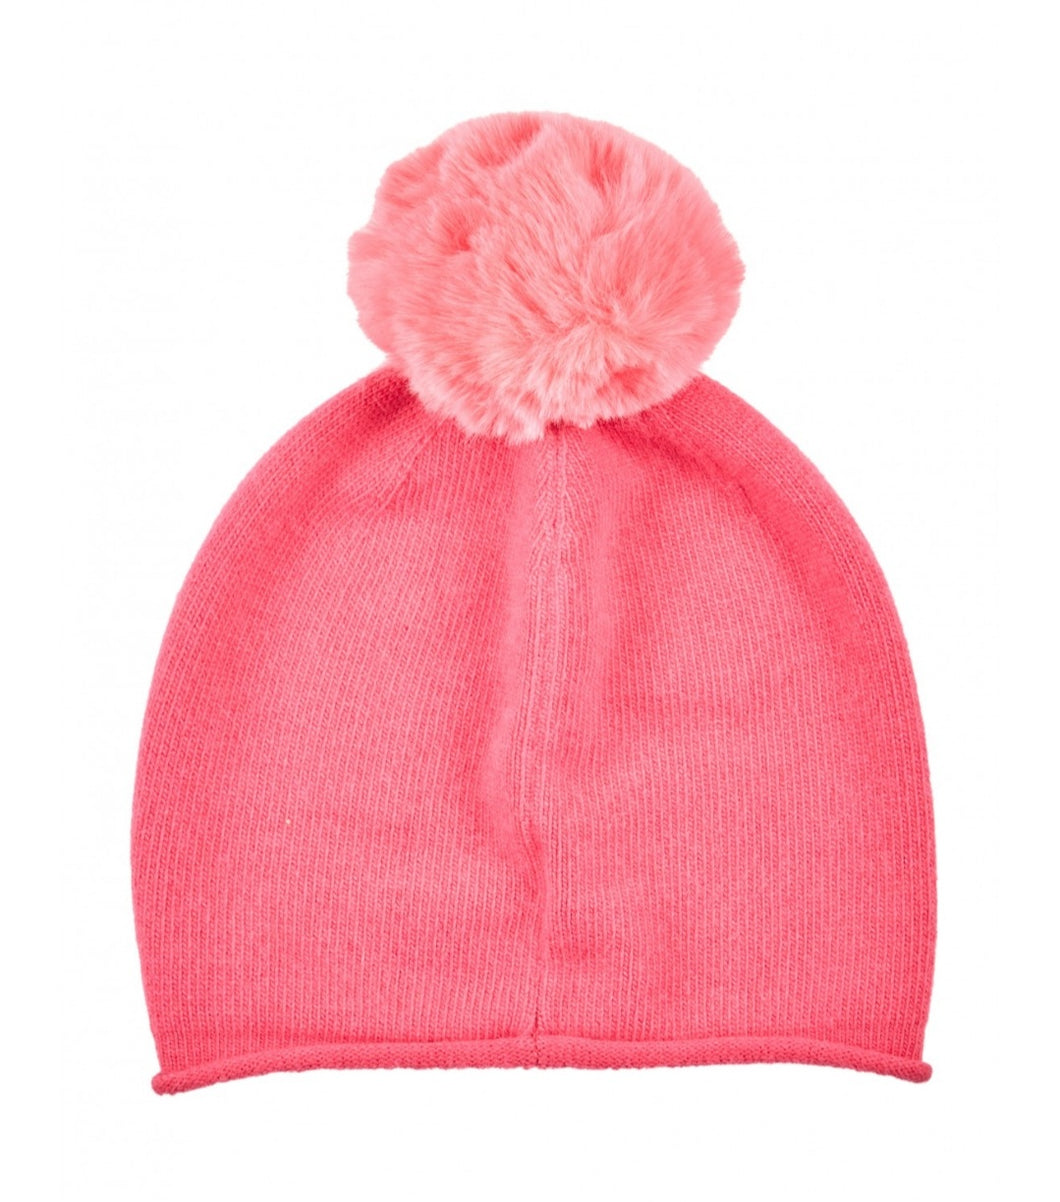 Pink Beanie Hat with Large Pompom